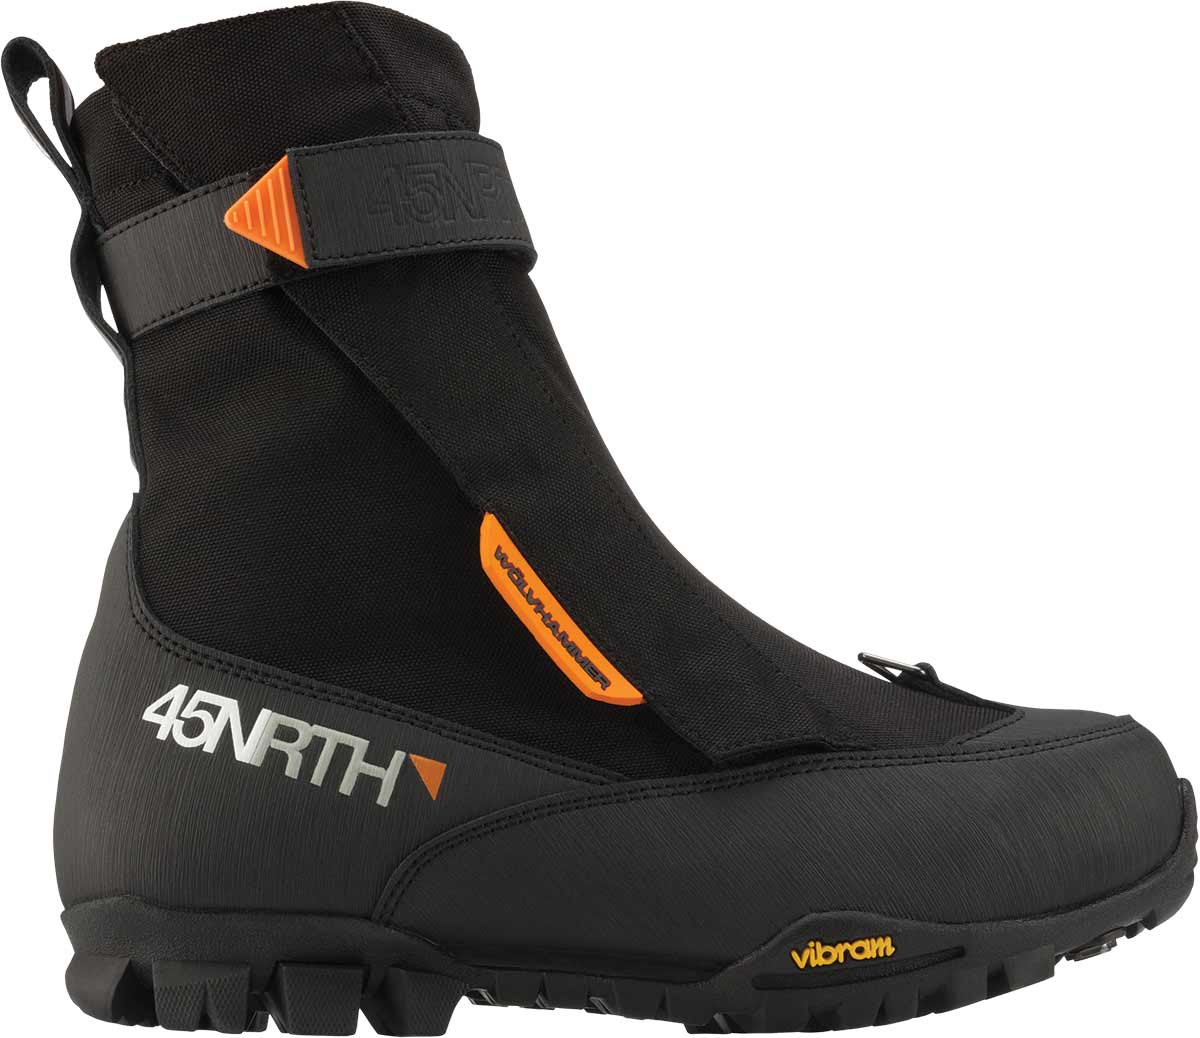 45 north cycling boots